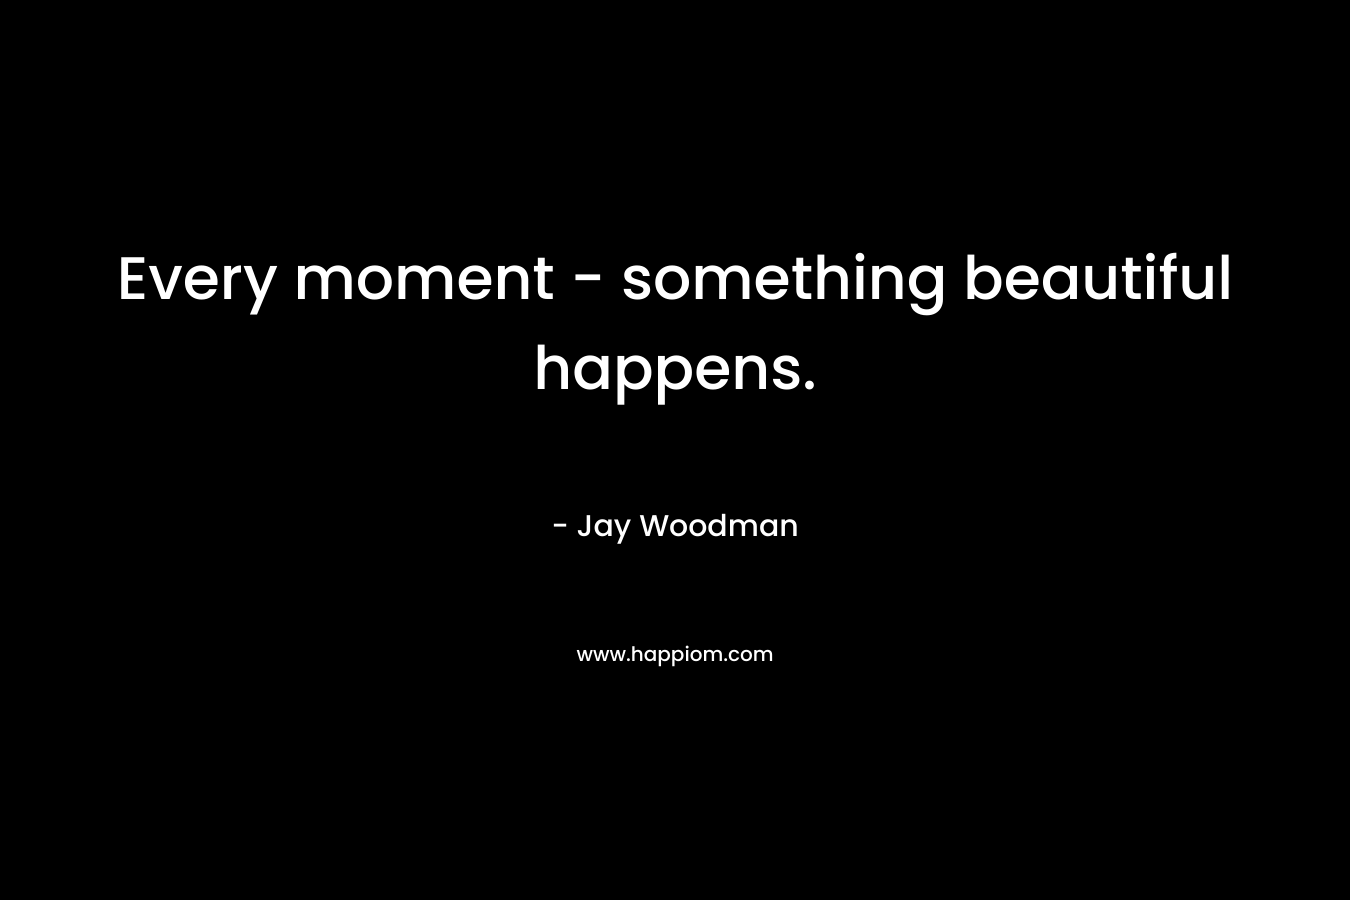 Every moment - something beautiful happens.